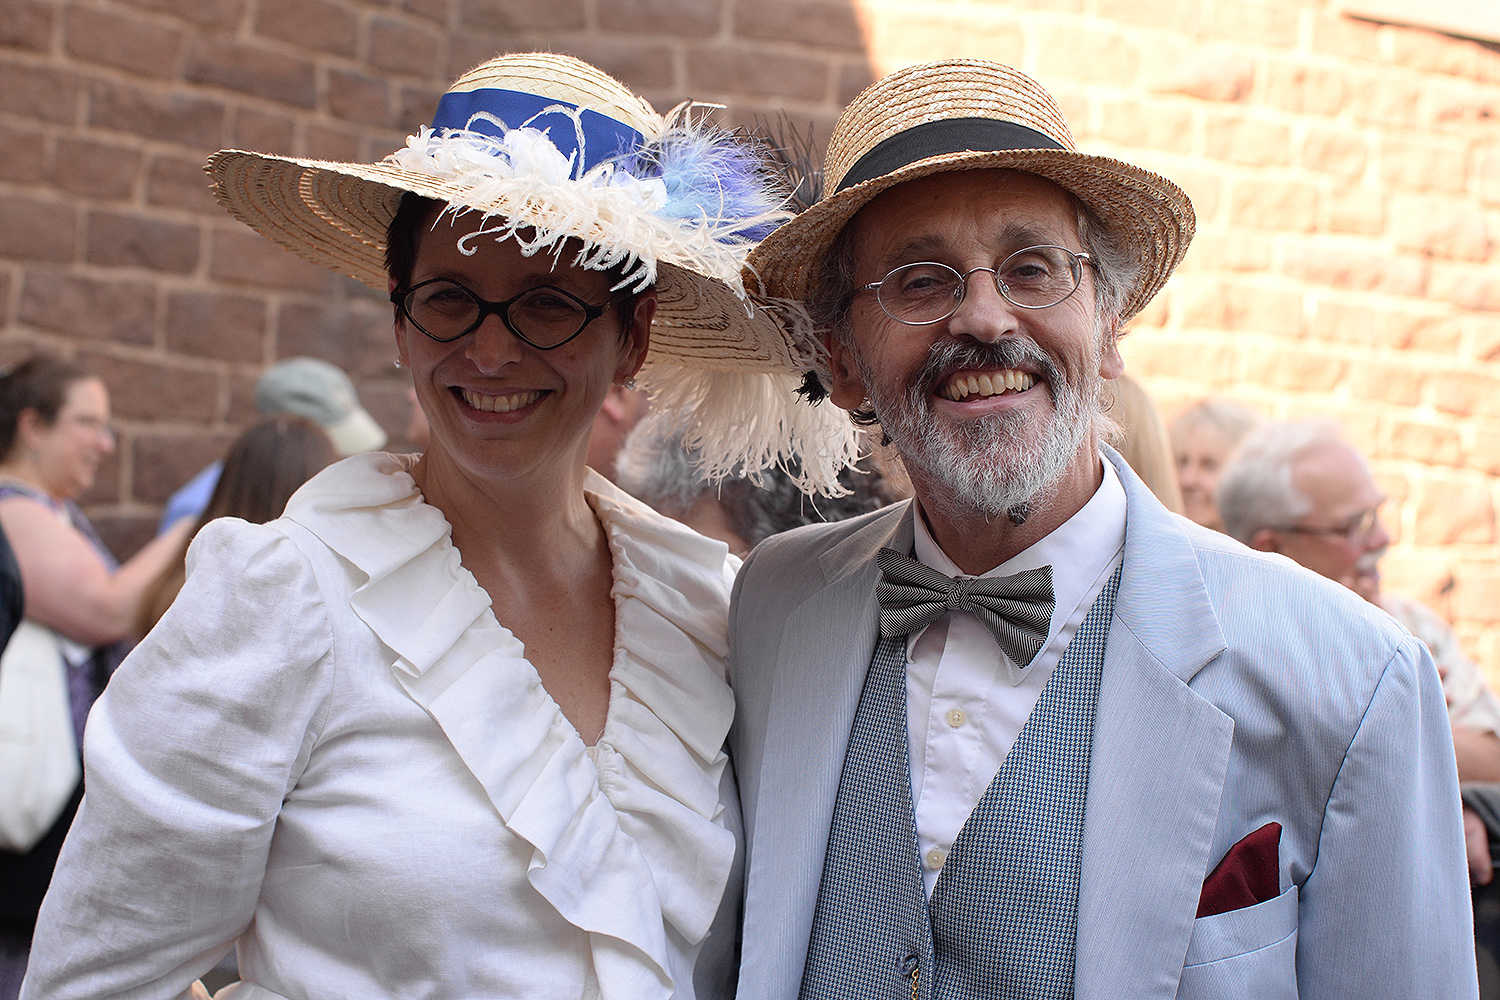 Ellen Nerenberg, dean of the arts and humanities, the Hollis Professor of Romance Languages and Literatures, and Lutz Huwel, professor of physics, were among the attendees who dressed as famous astronomers in period costume. All the costumes were designed by Cybele Moon, visiting assistant professor of theater.